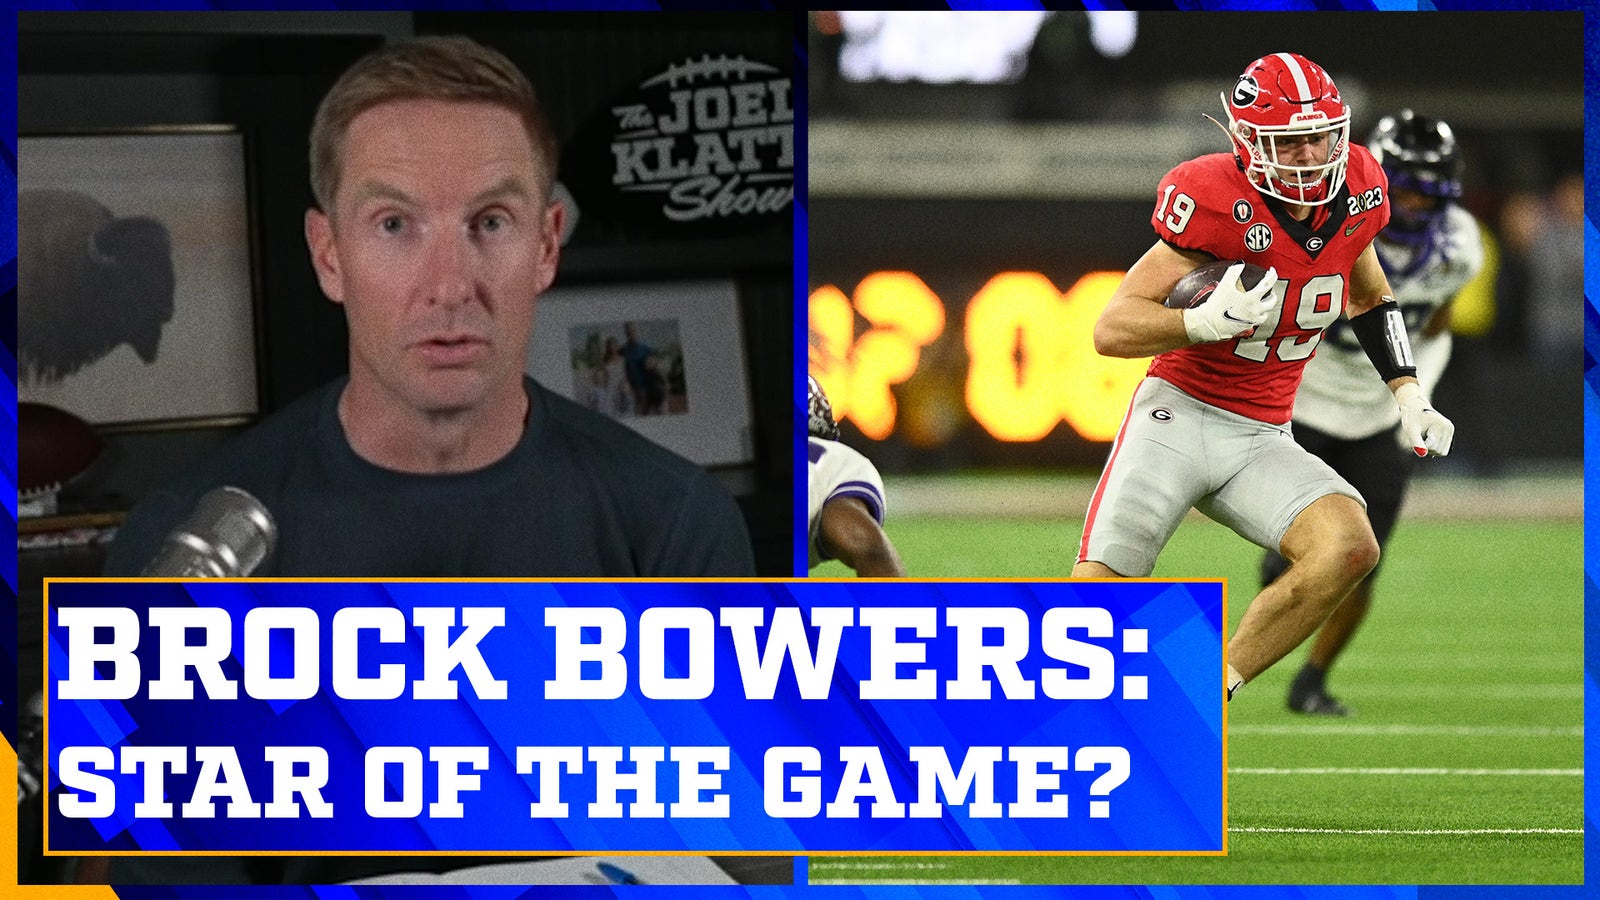 Brock Bowers is the offensive powerhouse for the Bulldogs